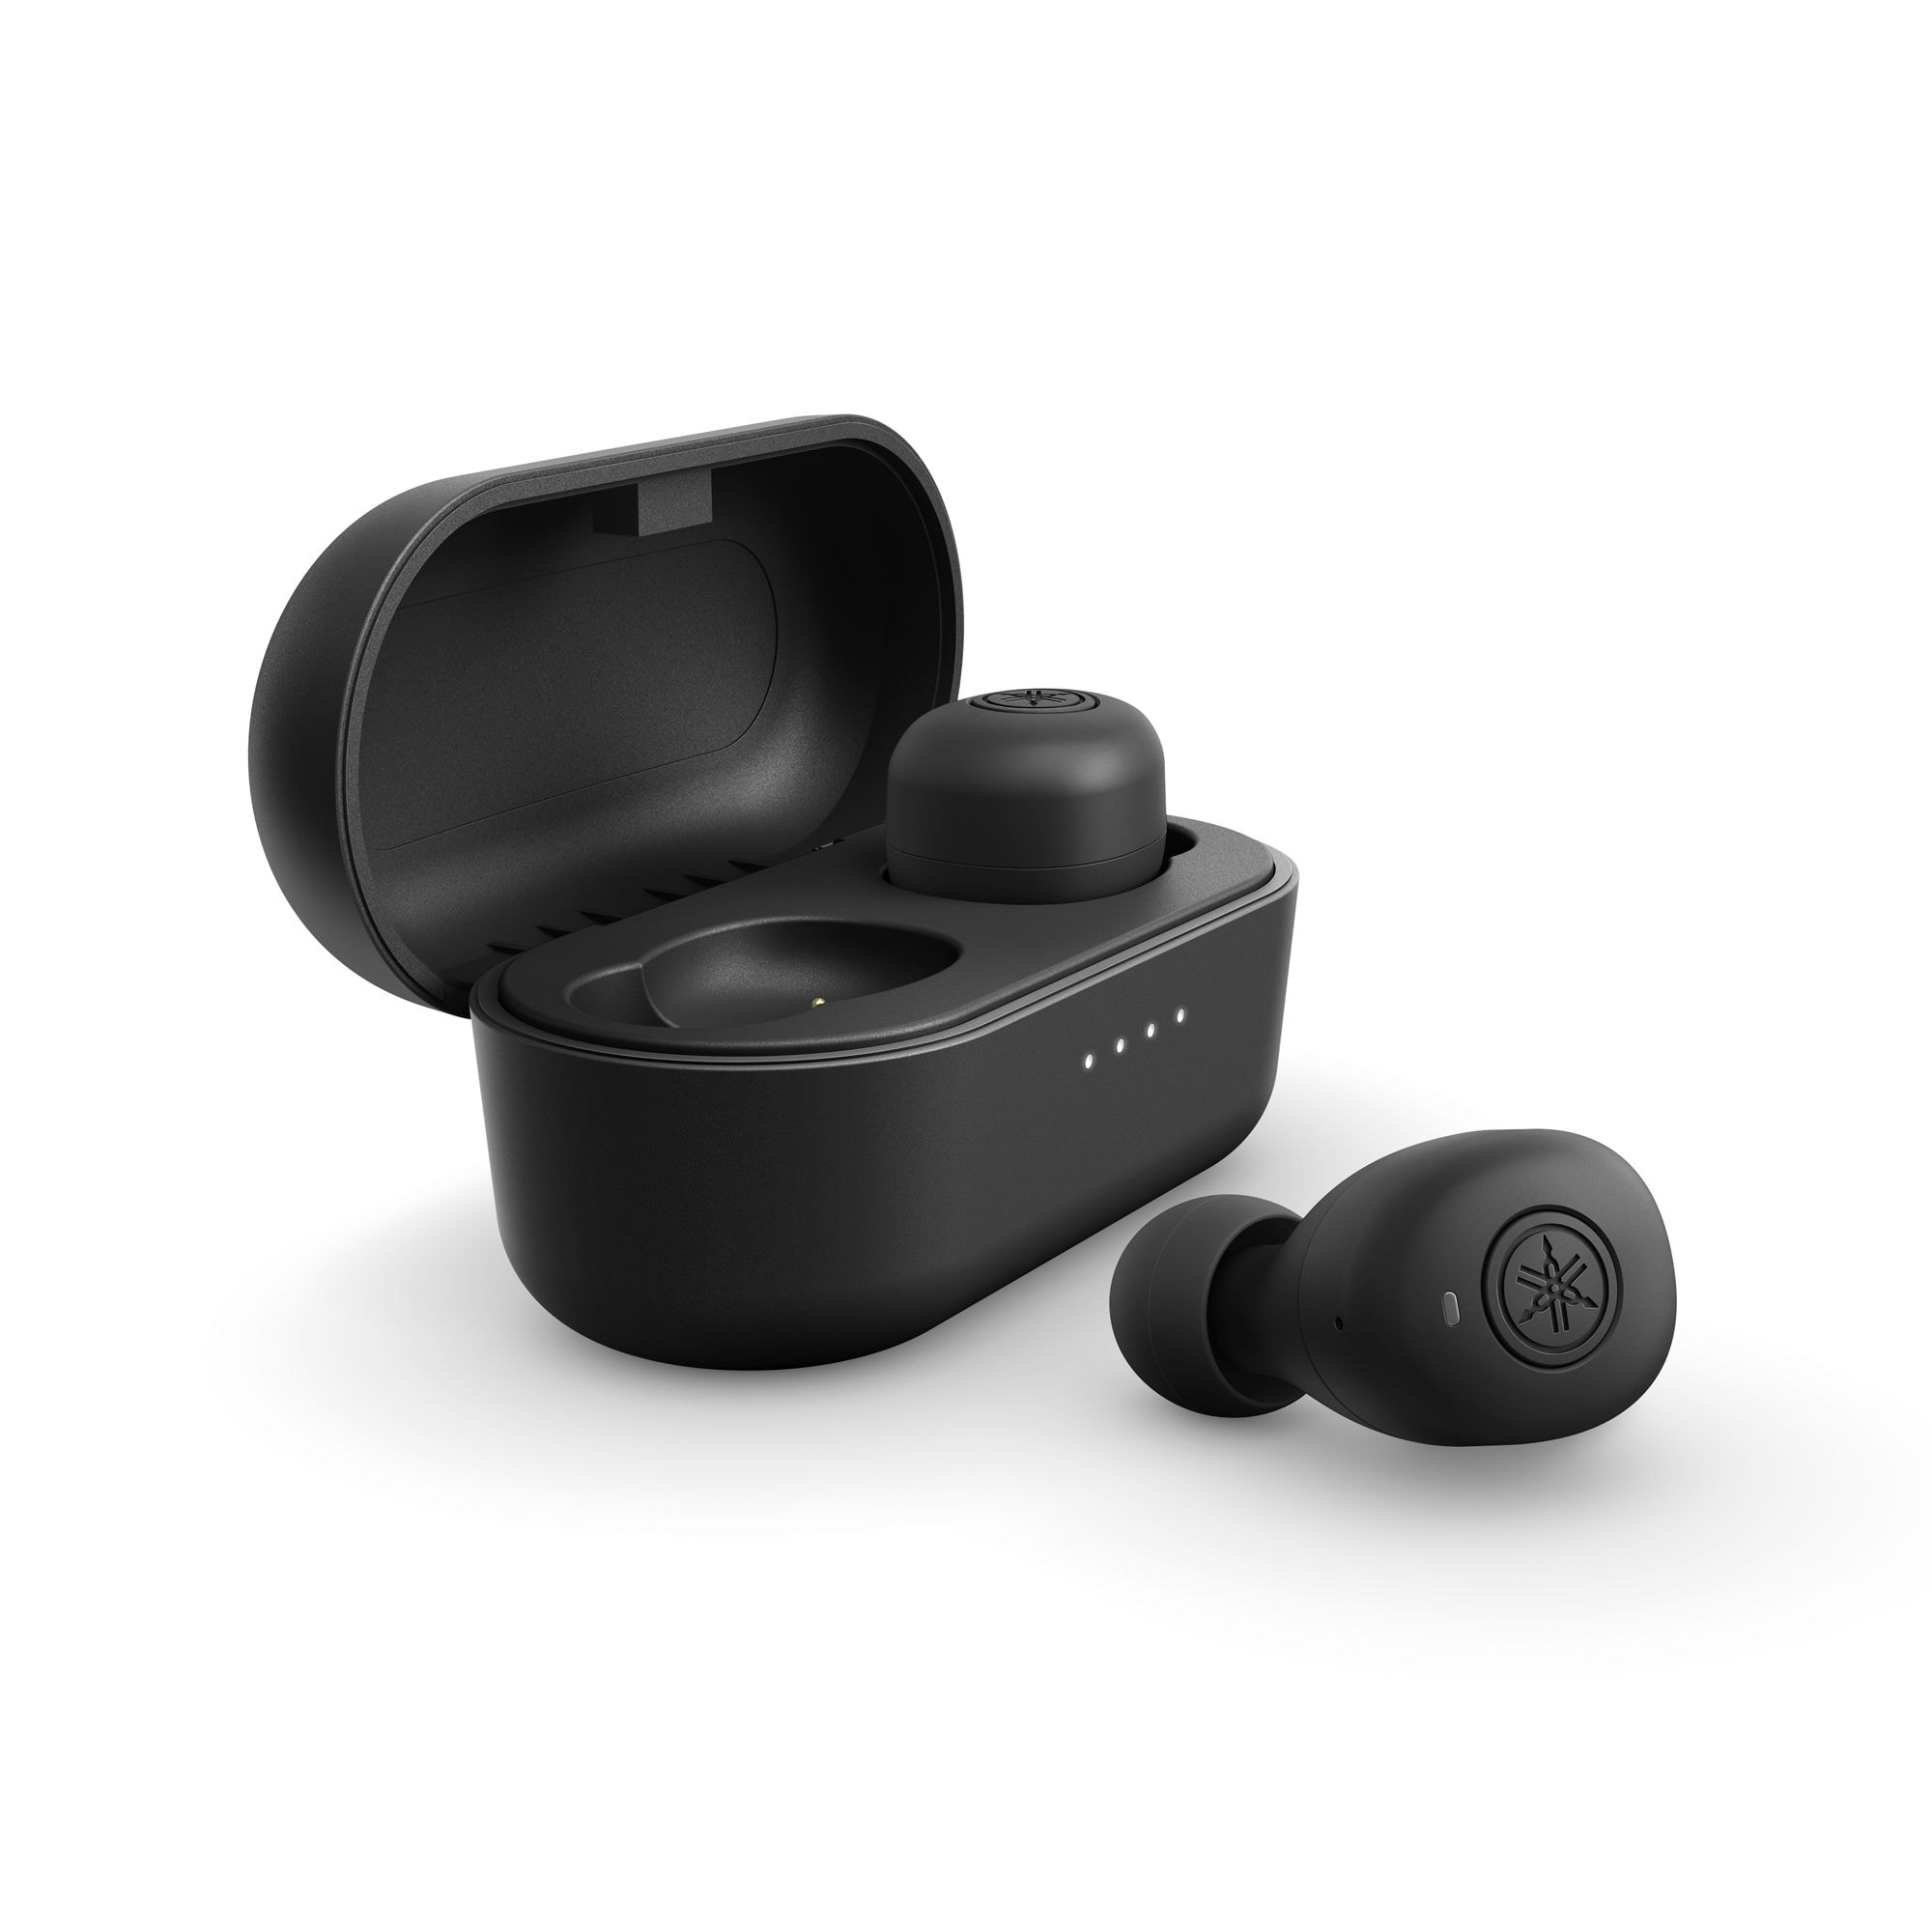 Increasing Volume On Your Wireless Earbuds